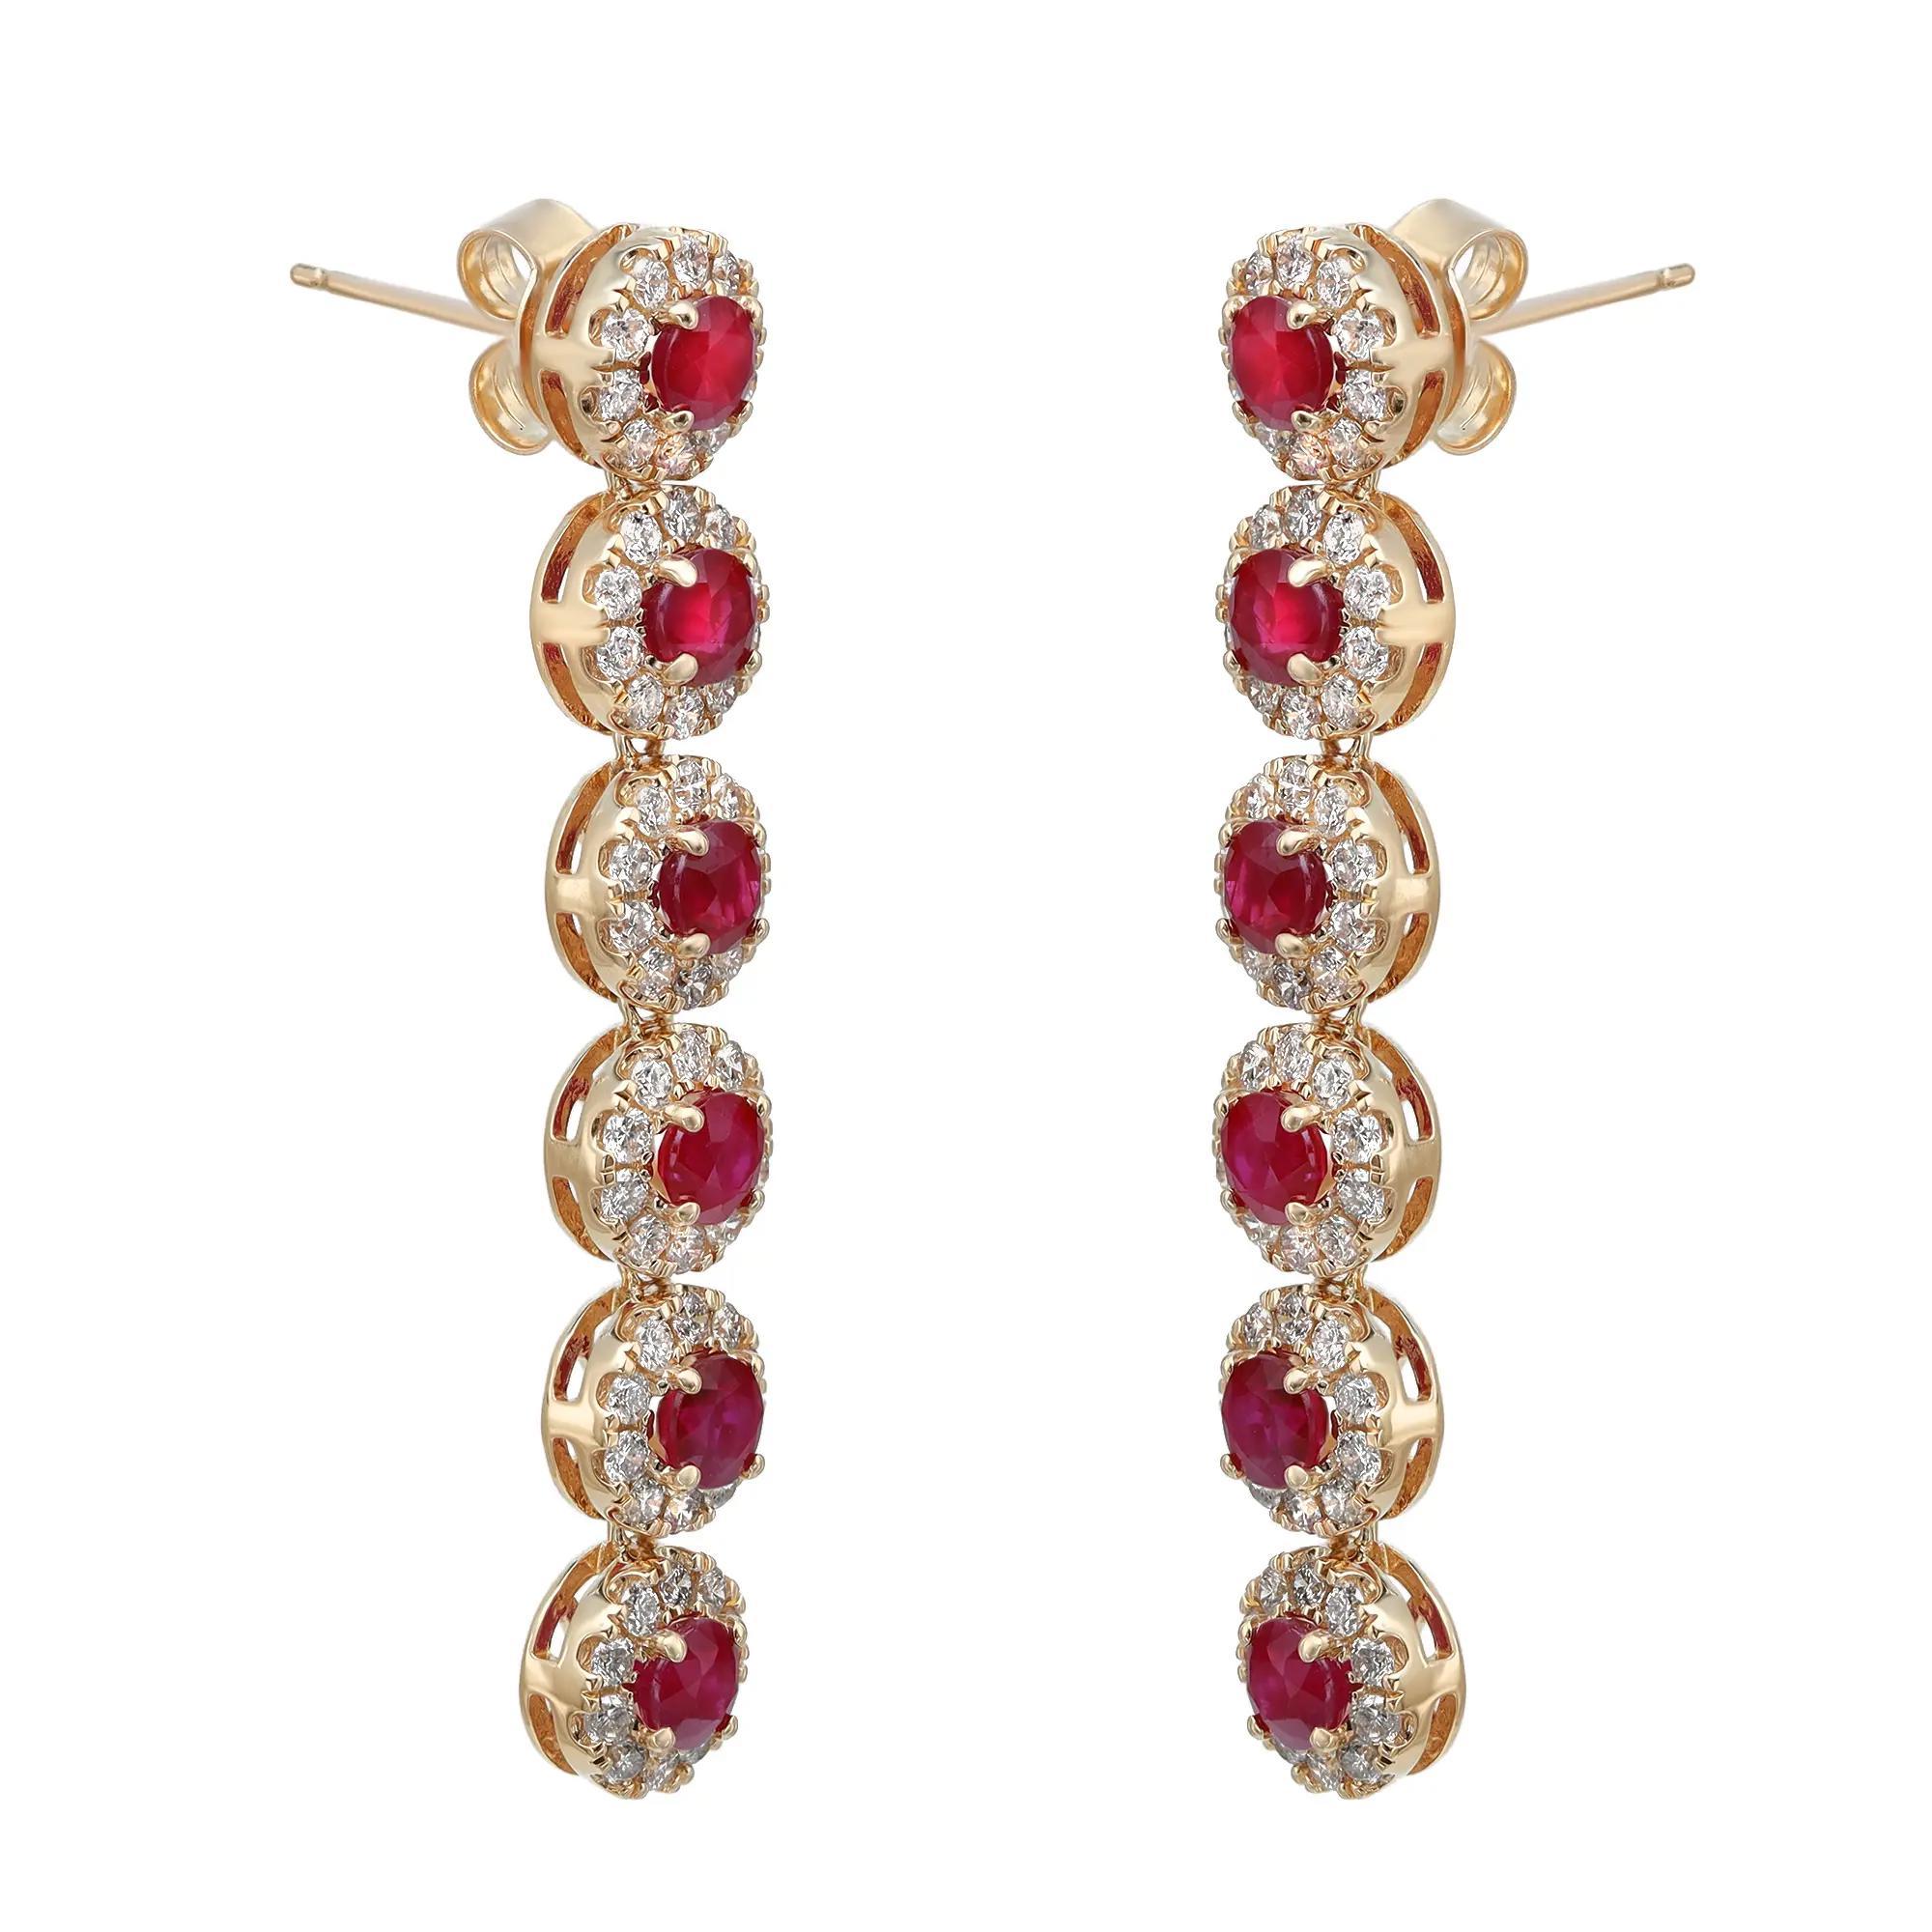 Elevate any attire with these dazzling drop earrings, perfect for any occasion. Crafted in fine 14K yellow gold. These earrings feature prong set round cut ruby with a halo of round brilliant cut diamonds. Total ruby weight: 3.00 Carats. Total